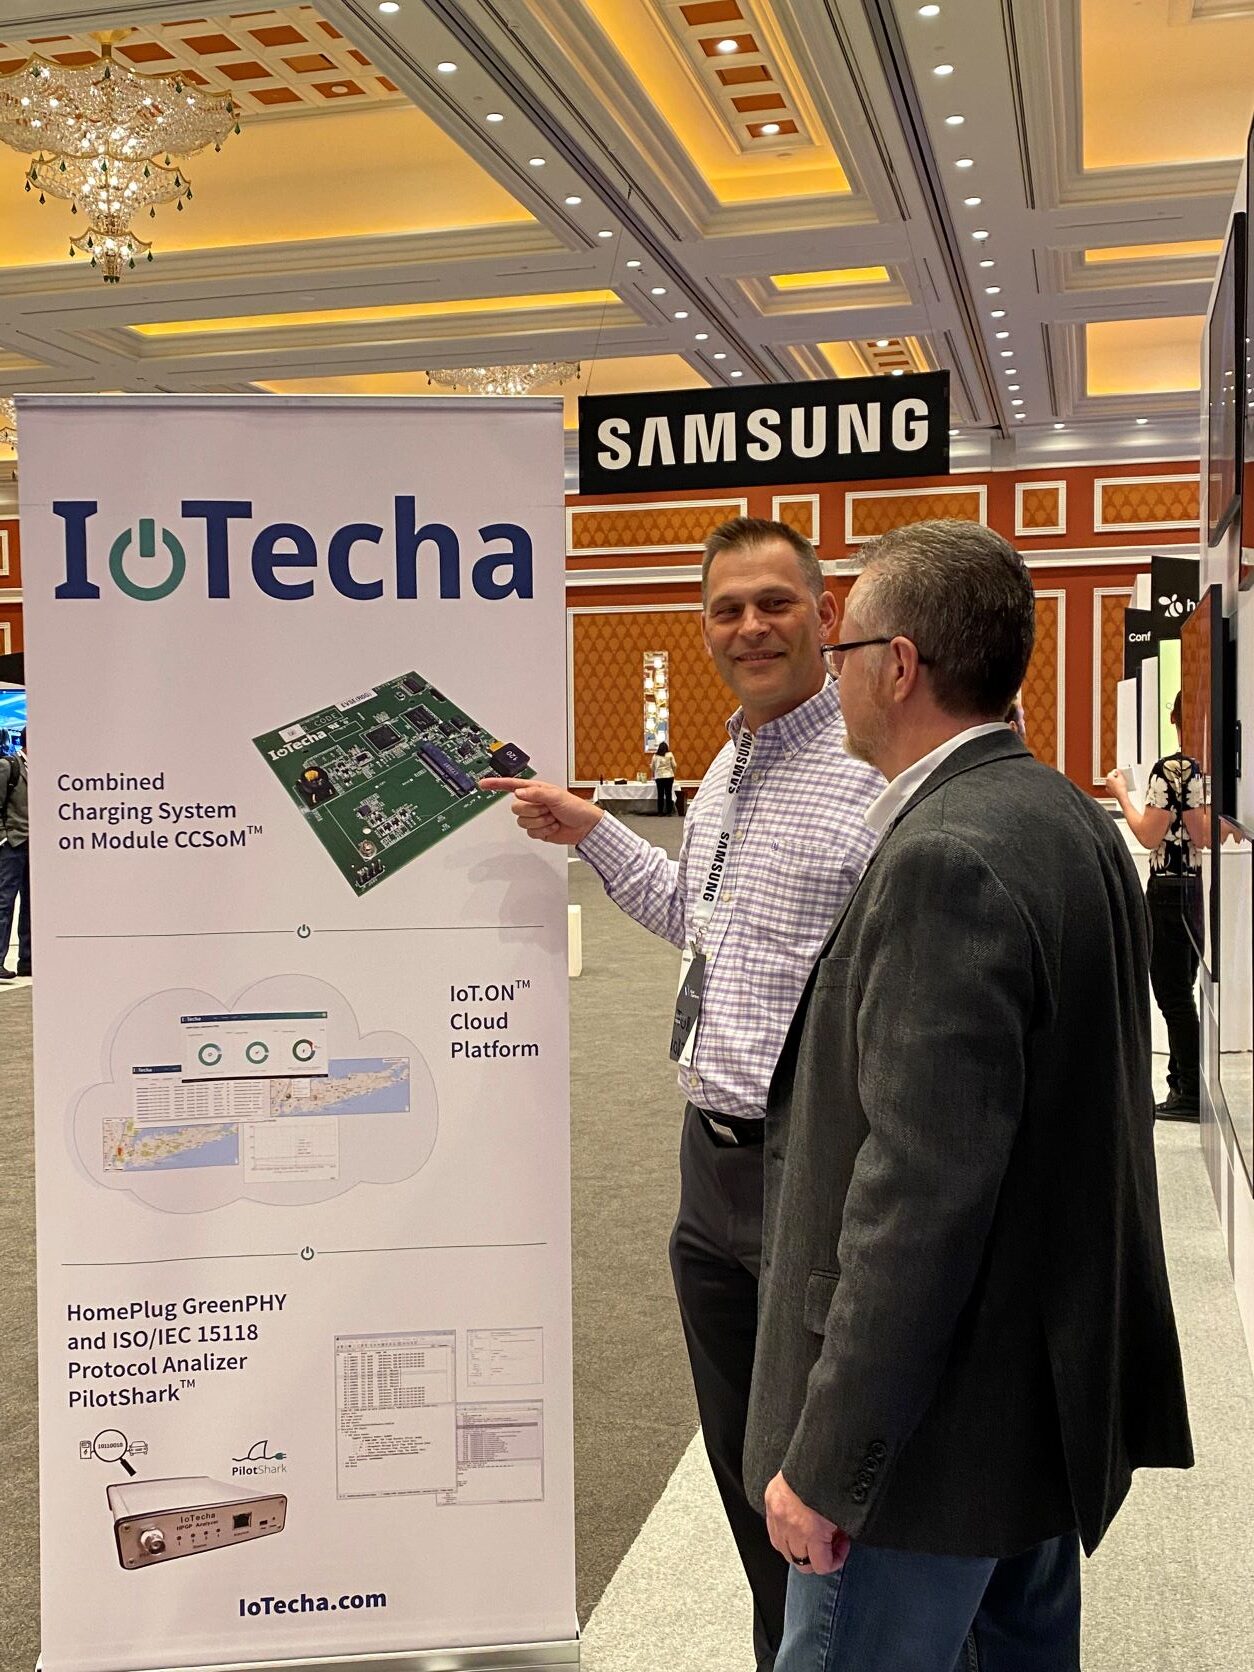 Samsung and IoTecha to Transform the EV Charging Experience!